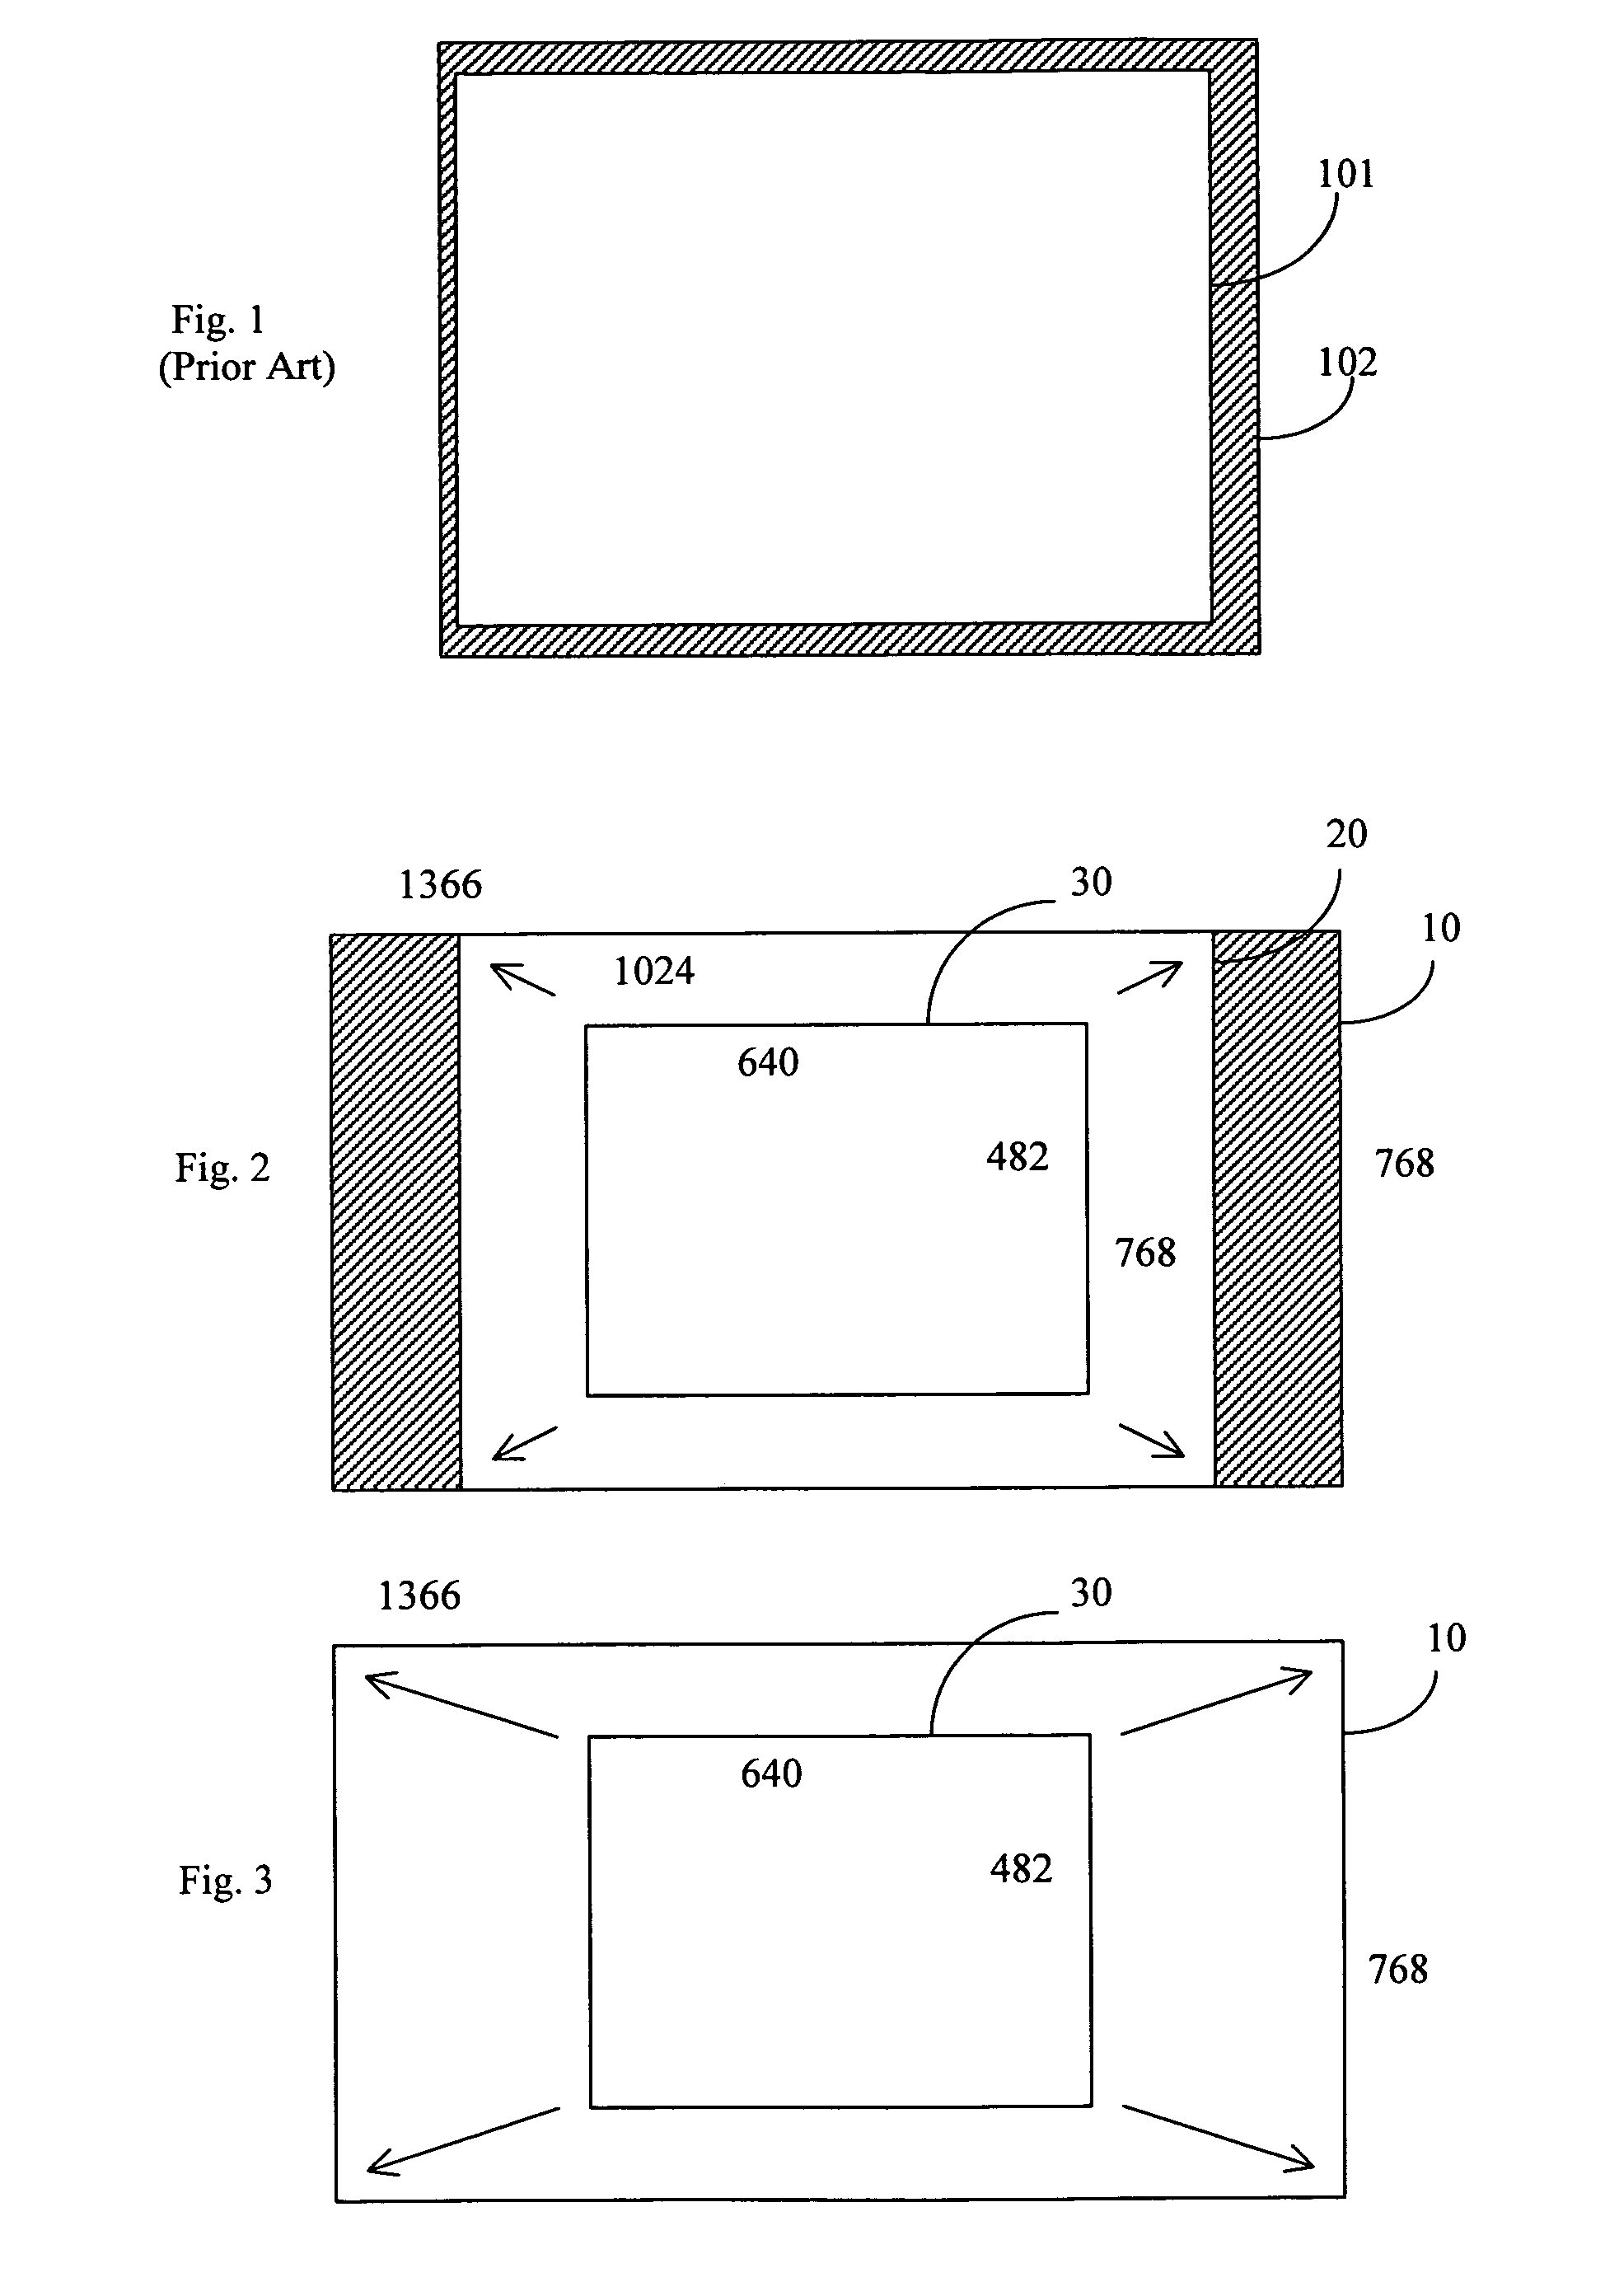 Method for scaling and cropping images for television display